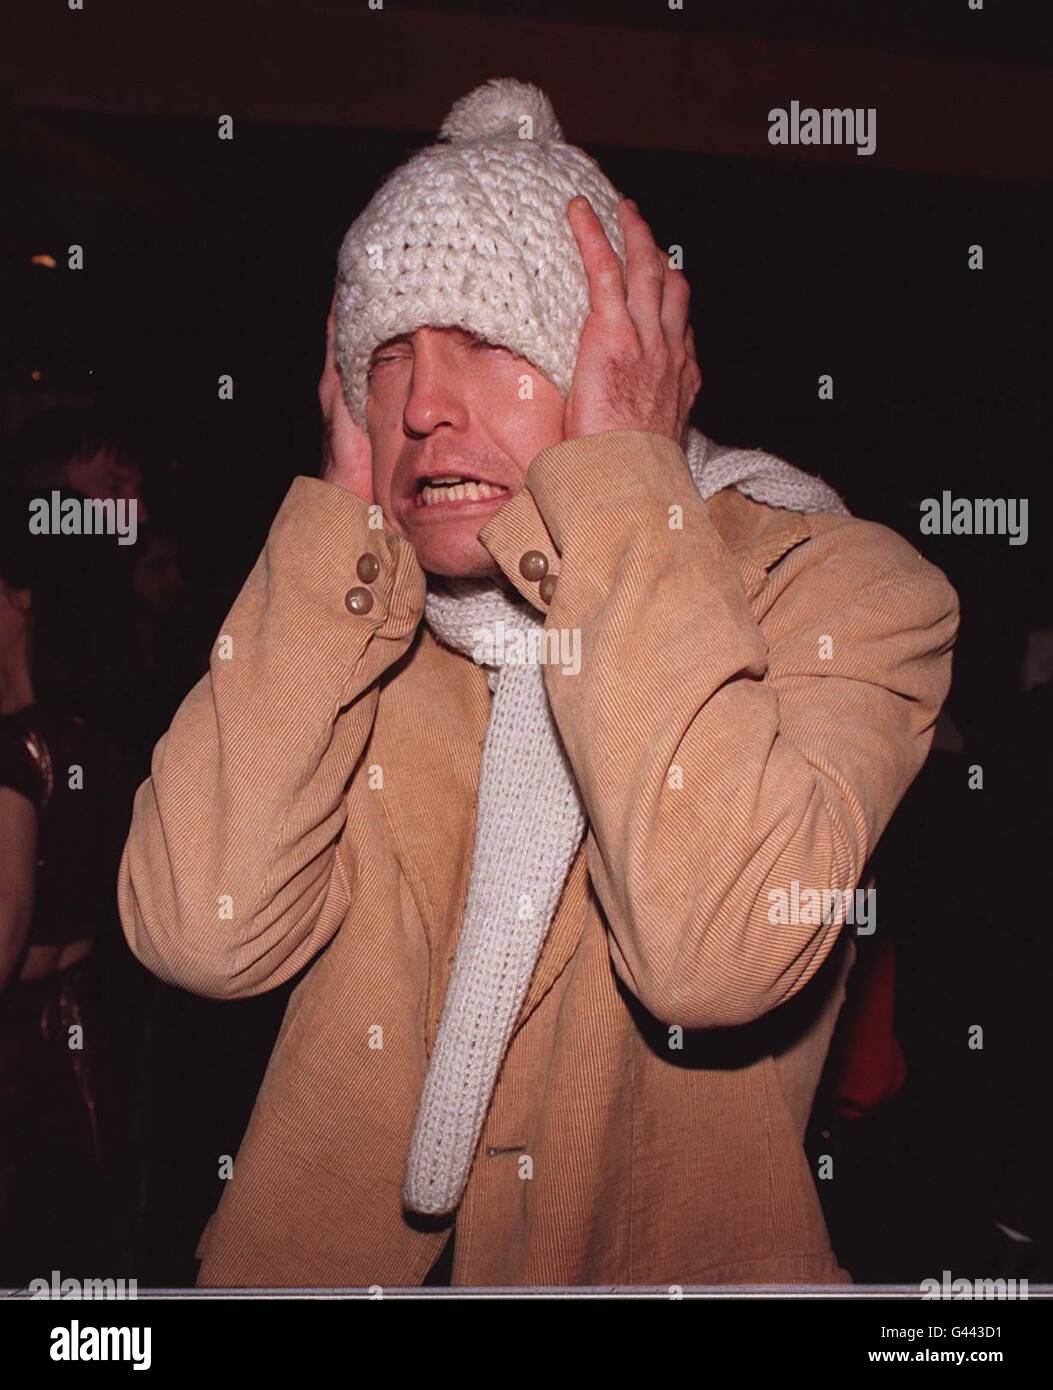 Actor/singer Jason Donovan clowns around at a charity 'Jokeathon', held at Bill Wyman's Sticky Fingers restaurant, in aid of the Daniels Charitable Trust, which was set up in the name of Batten's Disease sufferer four-year-old Rhys Daniels. Stock Photo